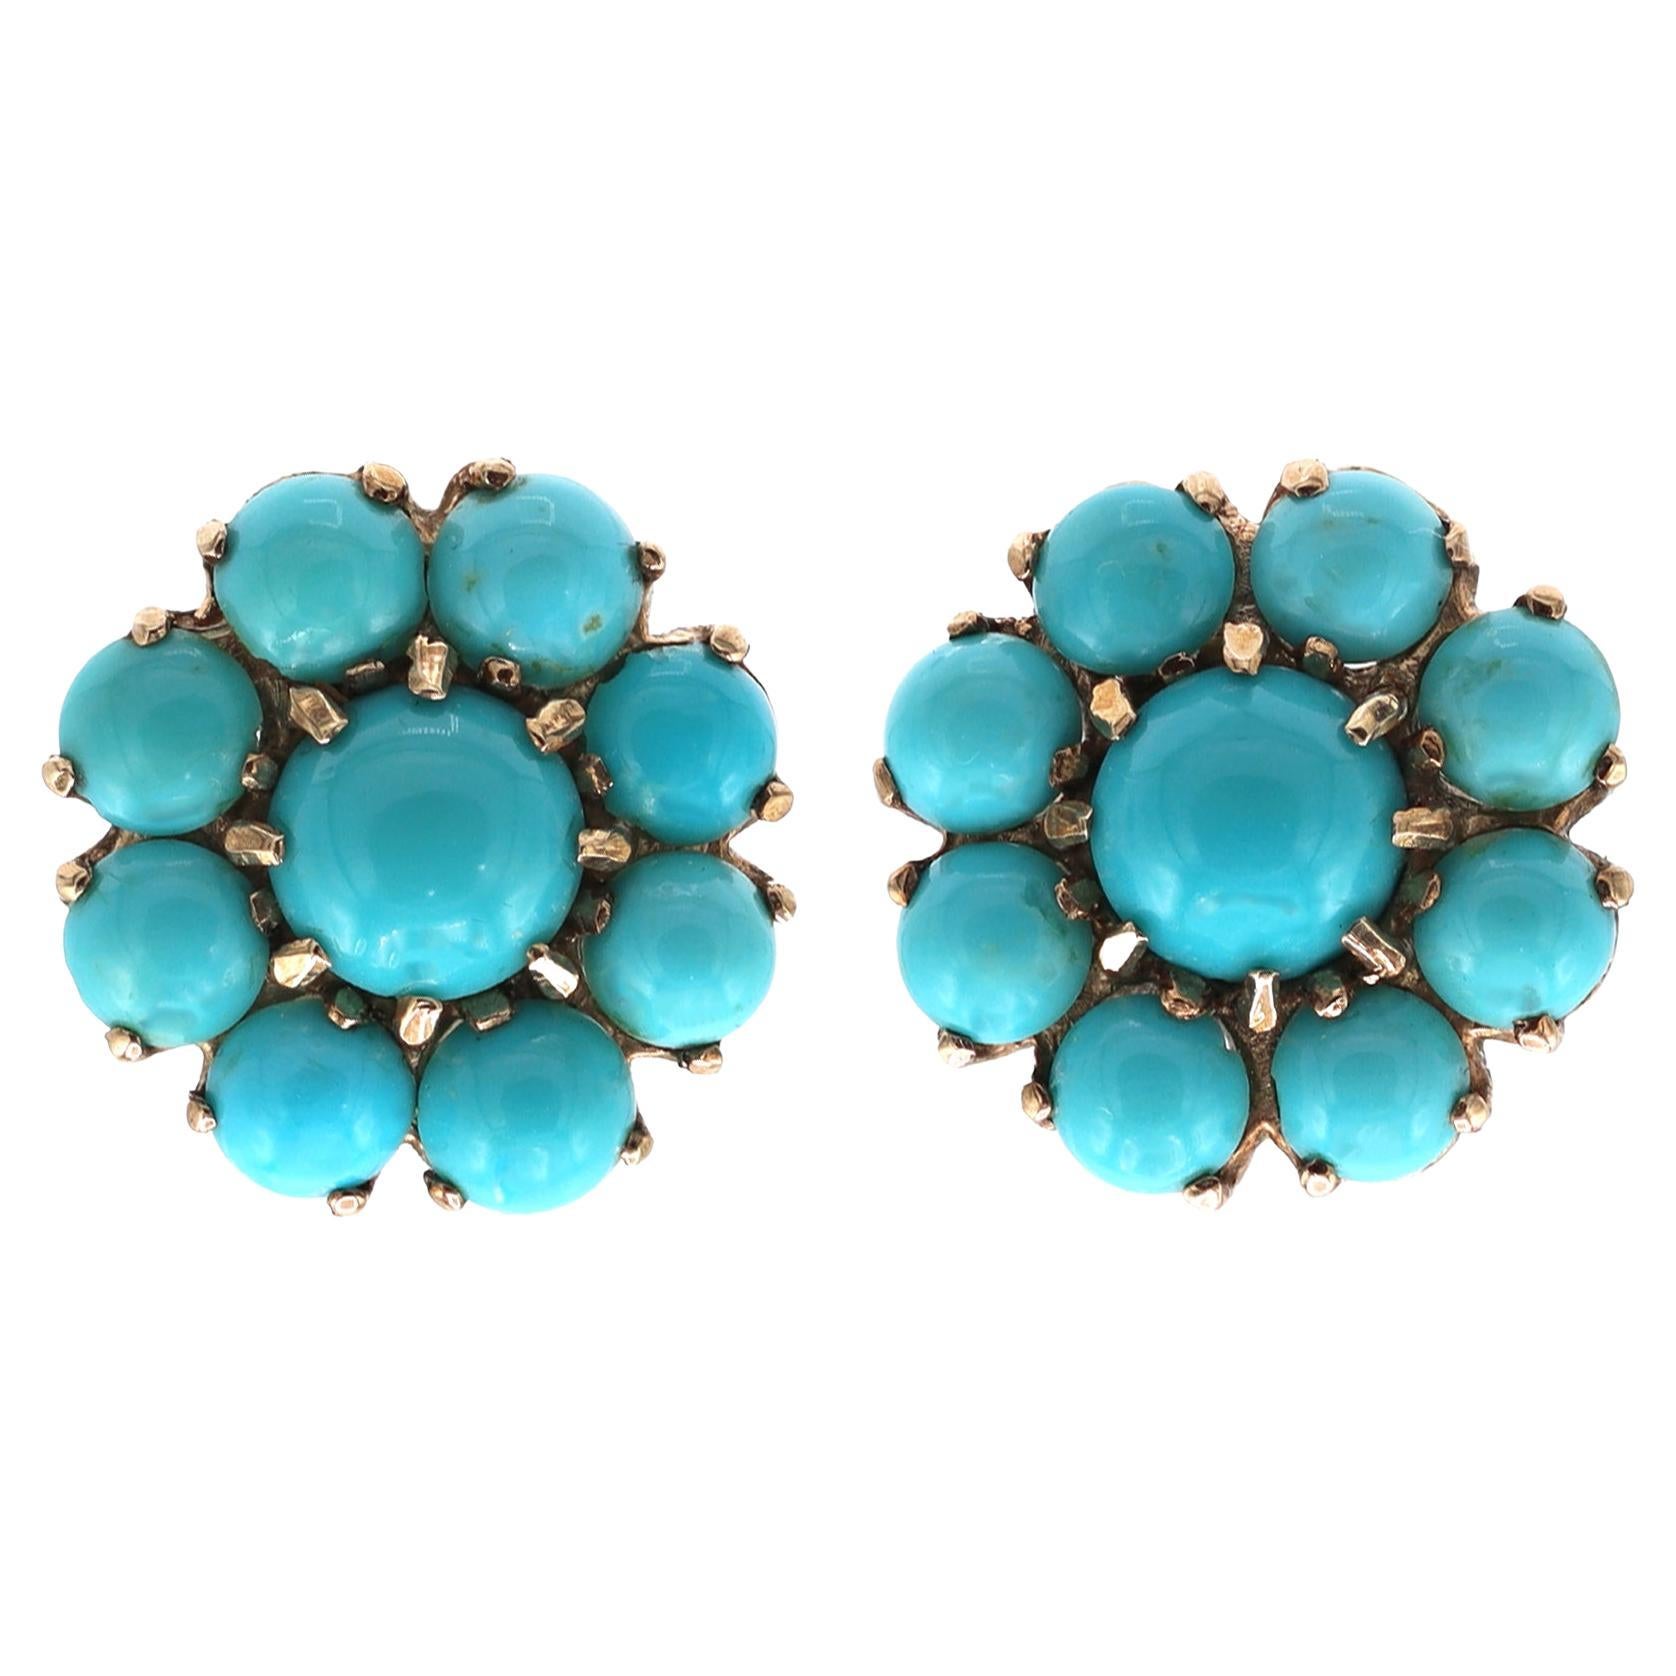 Late Victorian Natural Turquoise Florette Earrings in 10k